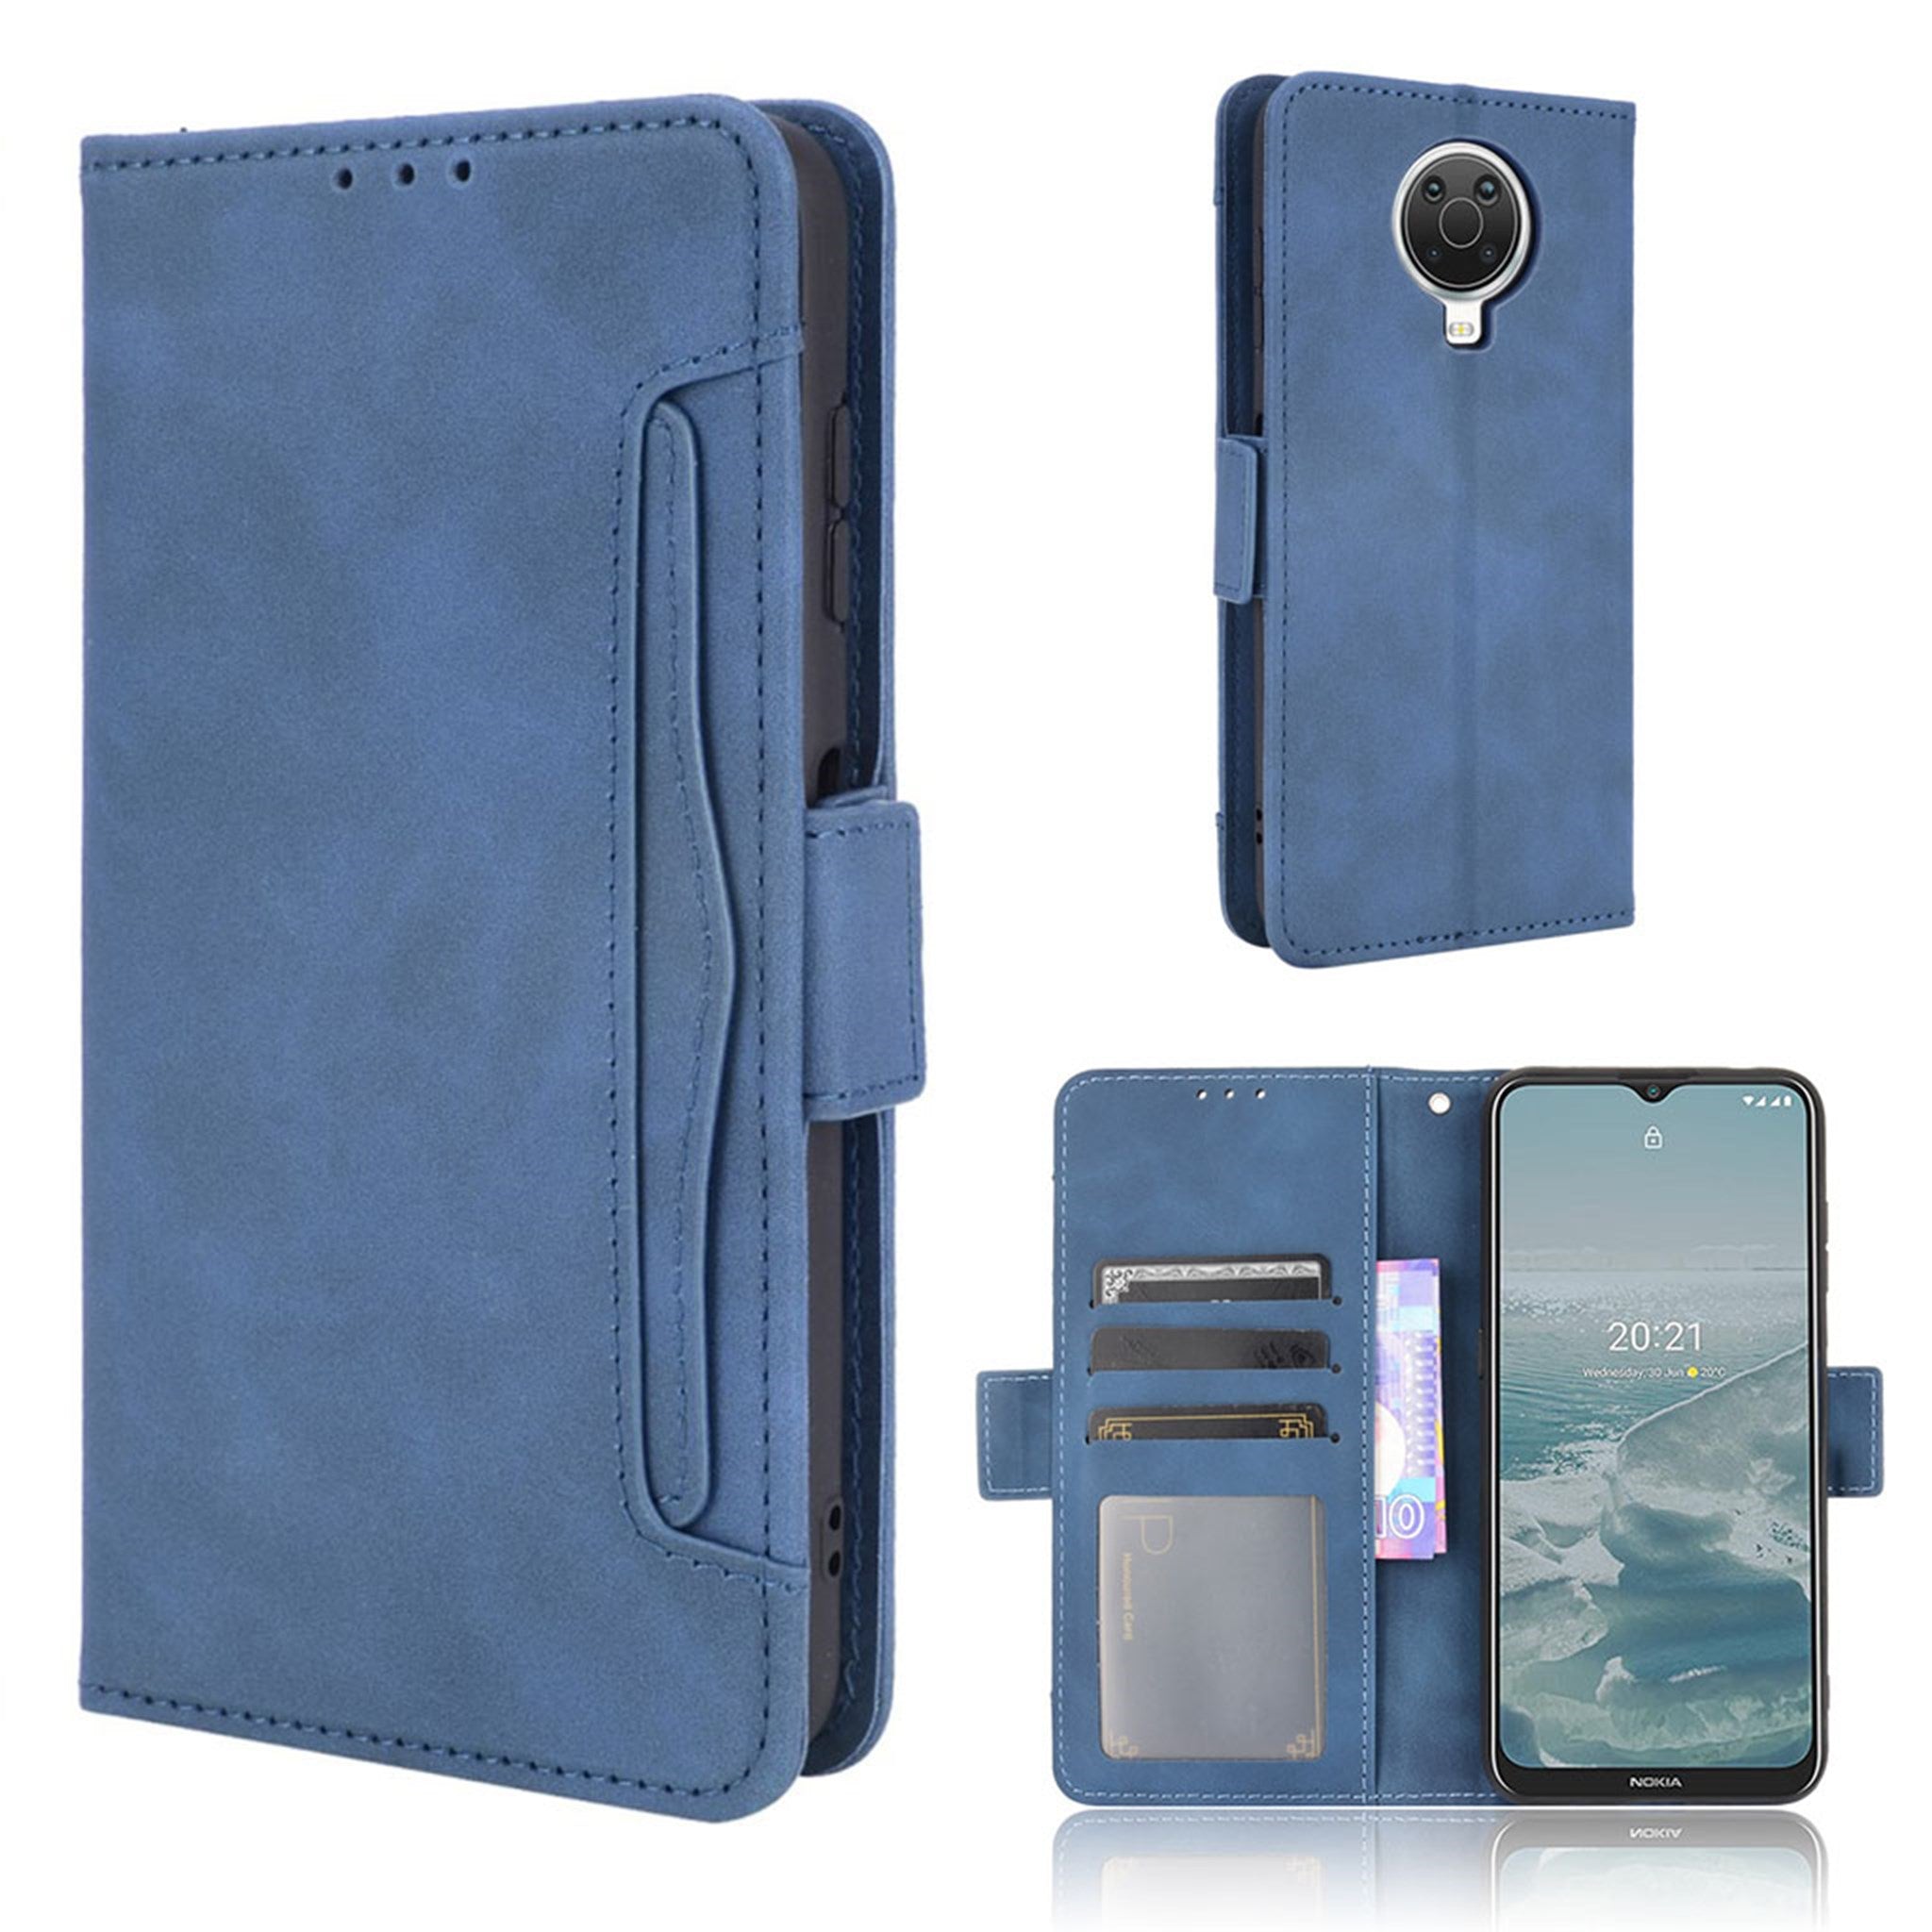 Modern-styled leather wallet case for Nokia G20 - Blue